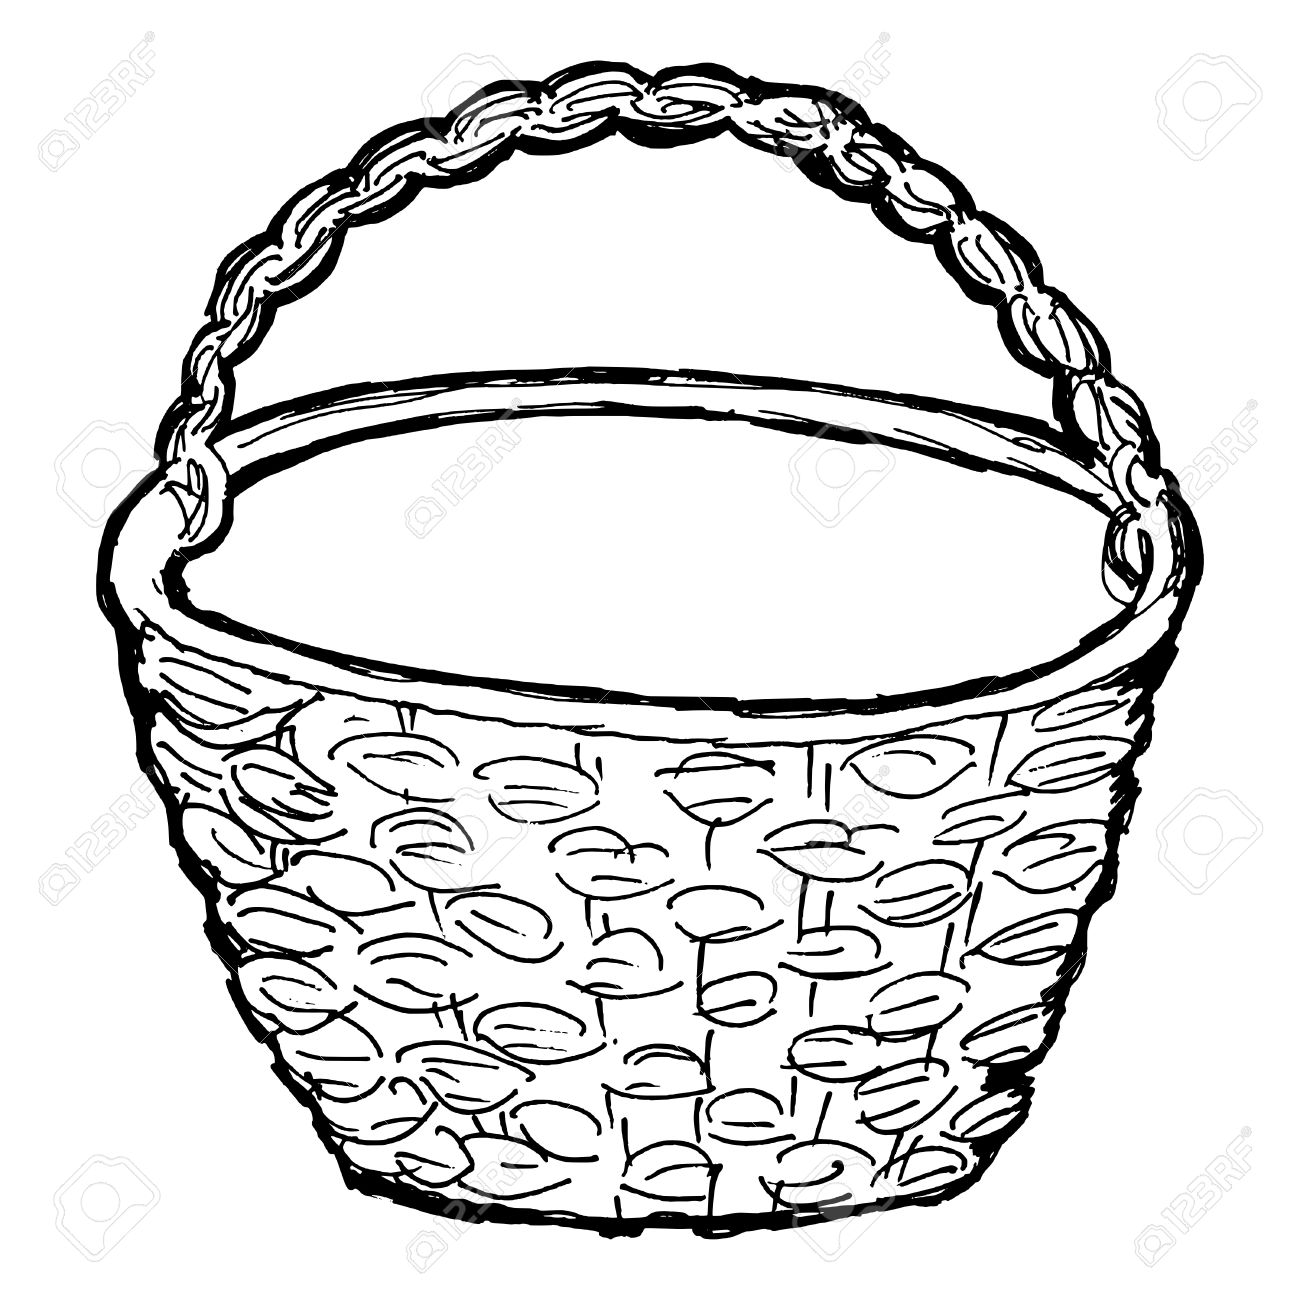 Basket Clipart Black And White - Basket Clipart Black And White 20 Free ...